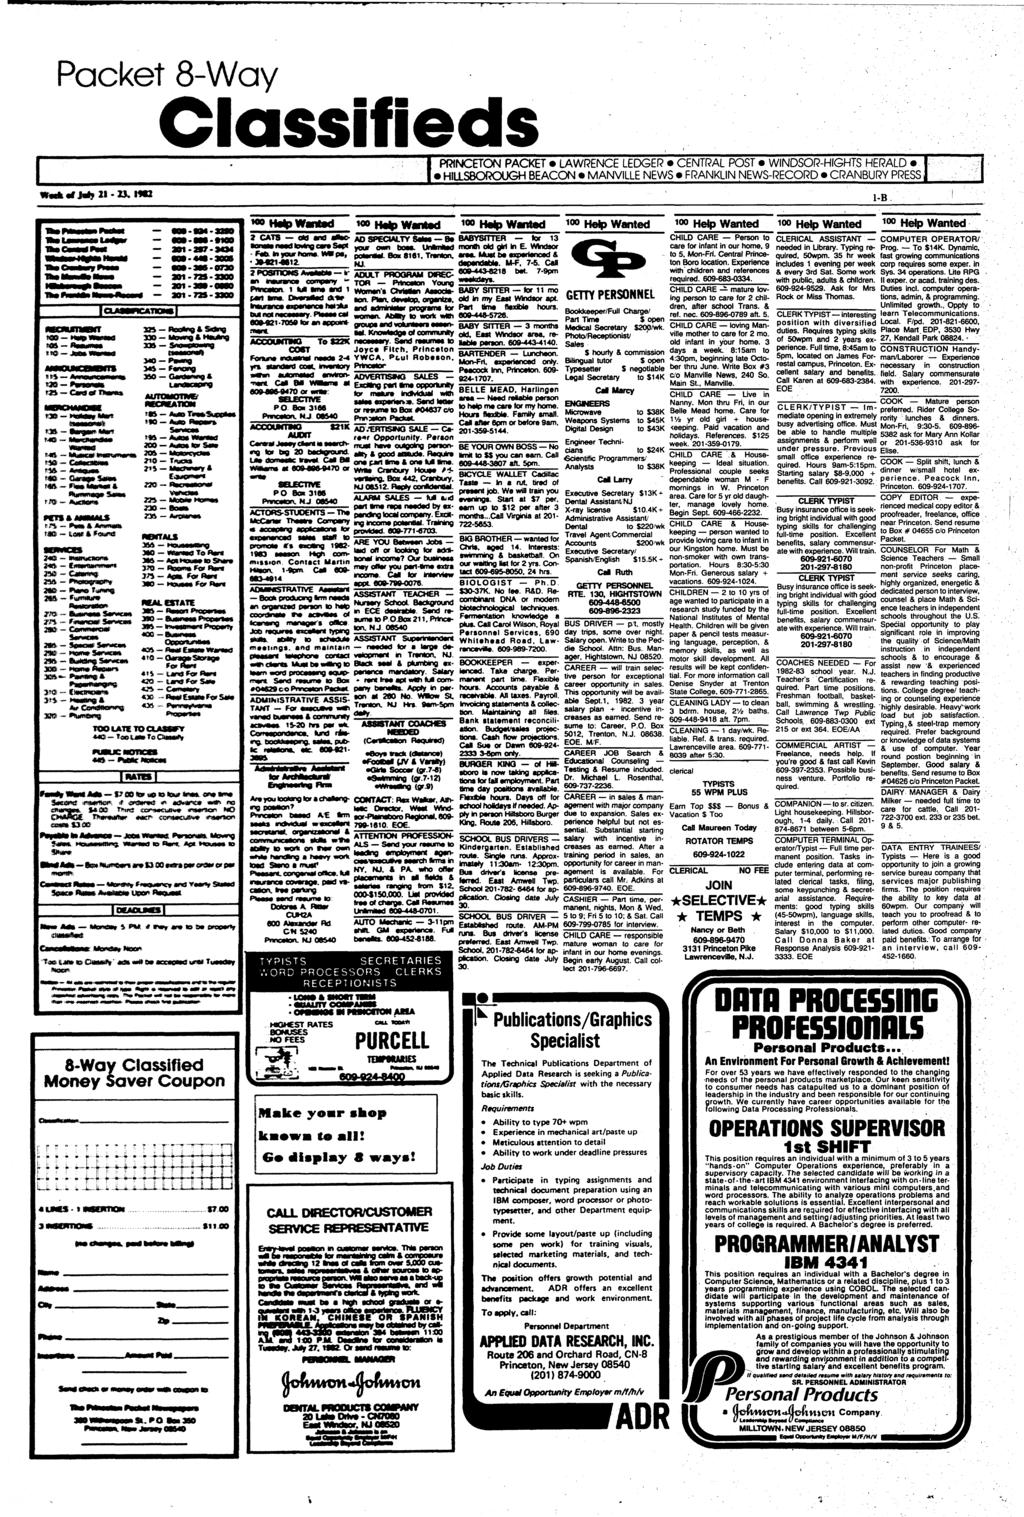 Packet 8-Way Classifieds IPRINCETON PACKET LAWRENCE LEDGER CENTRAL POST WINDSOR-HIGHTS HERALD I H1LLSBOROUGH BEACON* MANVILLE NEWS FRANKLIN NEWS-RECORD CRANBURY PRESS 1-B ftacmexw* 301-72S atraa*s IF